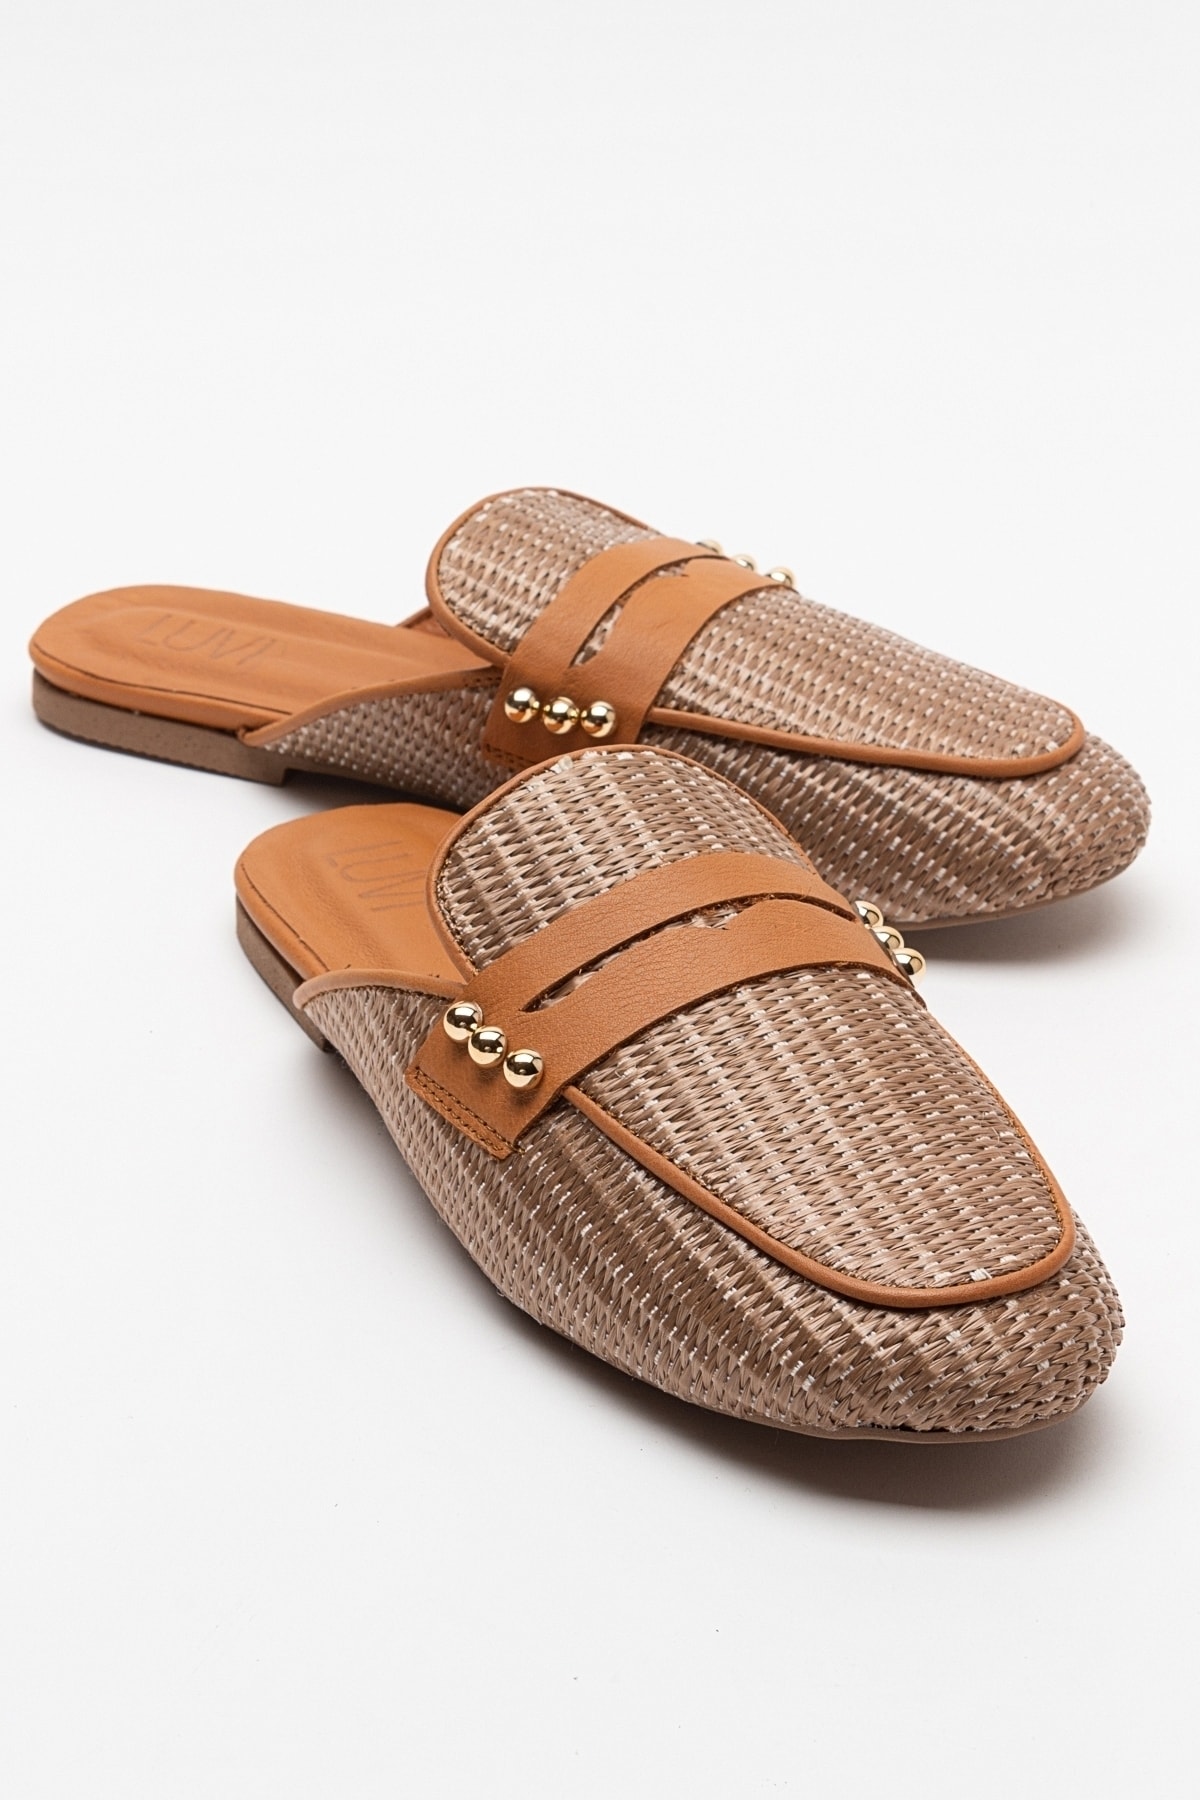 Levně LuviShoes 165 Women's Slippers From Genuine Leather Brown Straw